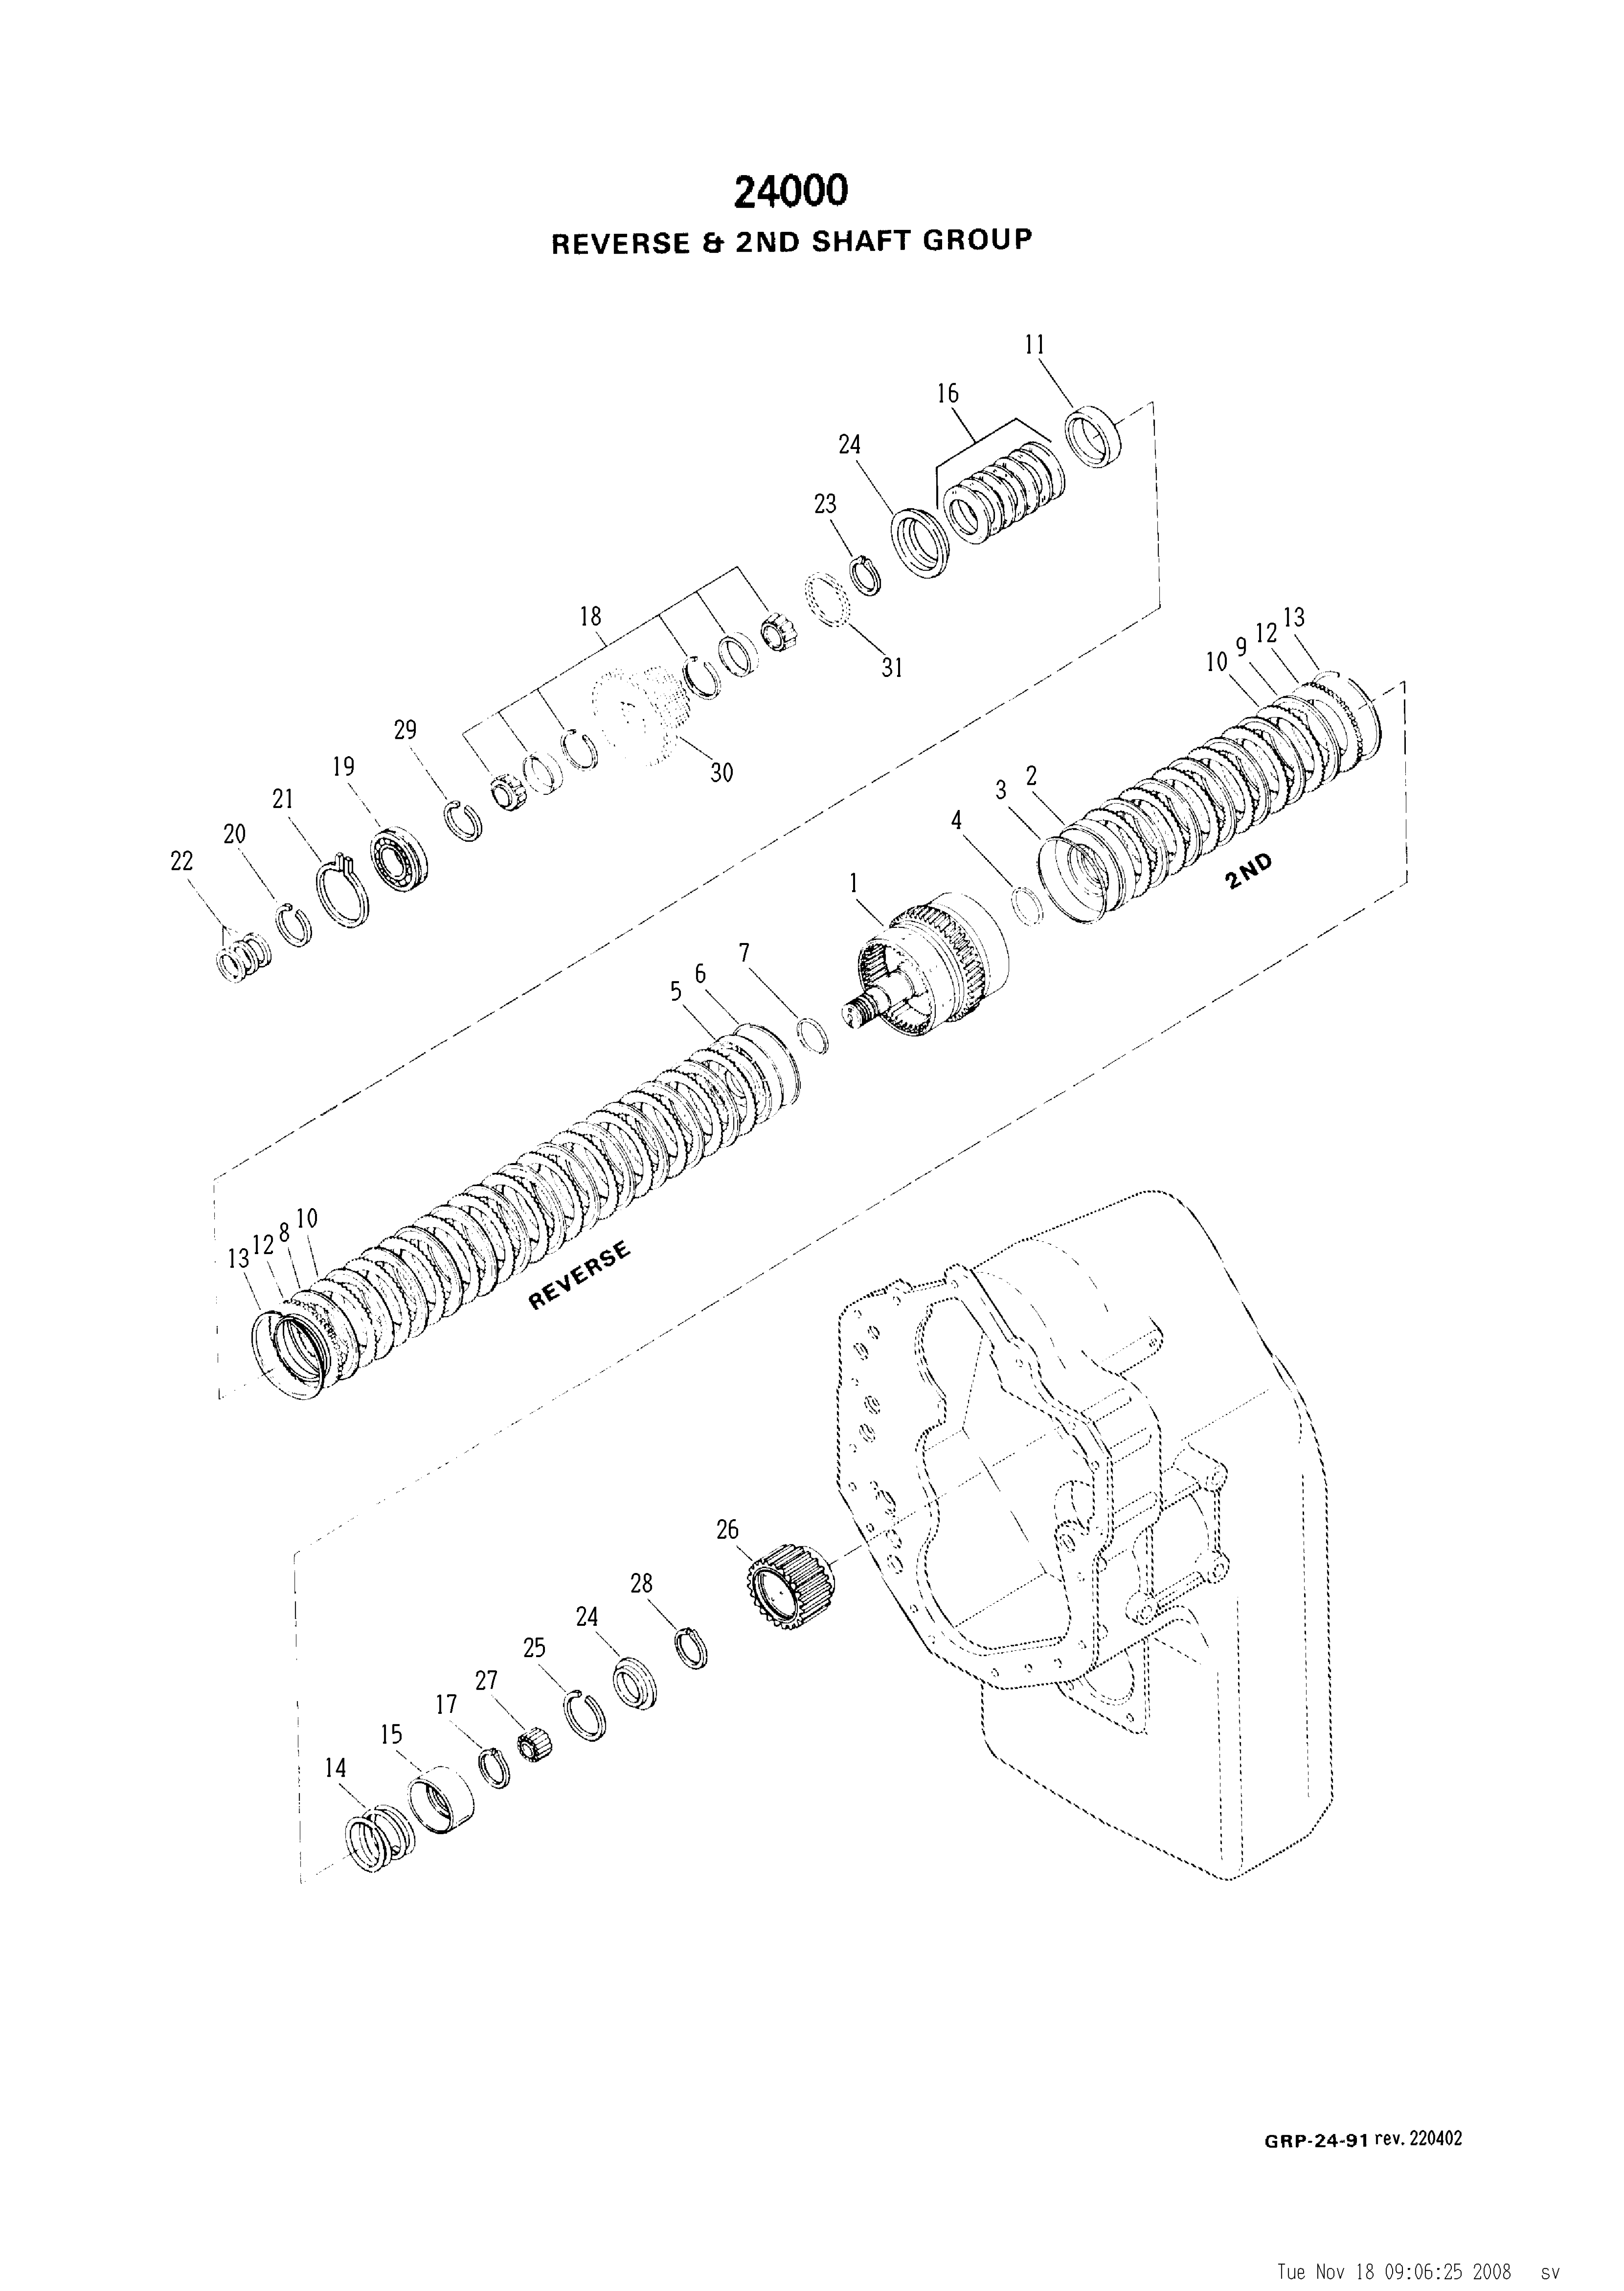 drawing for MILLER TECHNOLOGY 002705-001 - A DISC SPRING (figure 3)